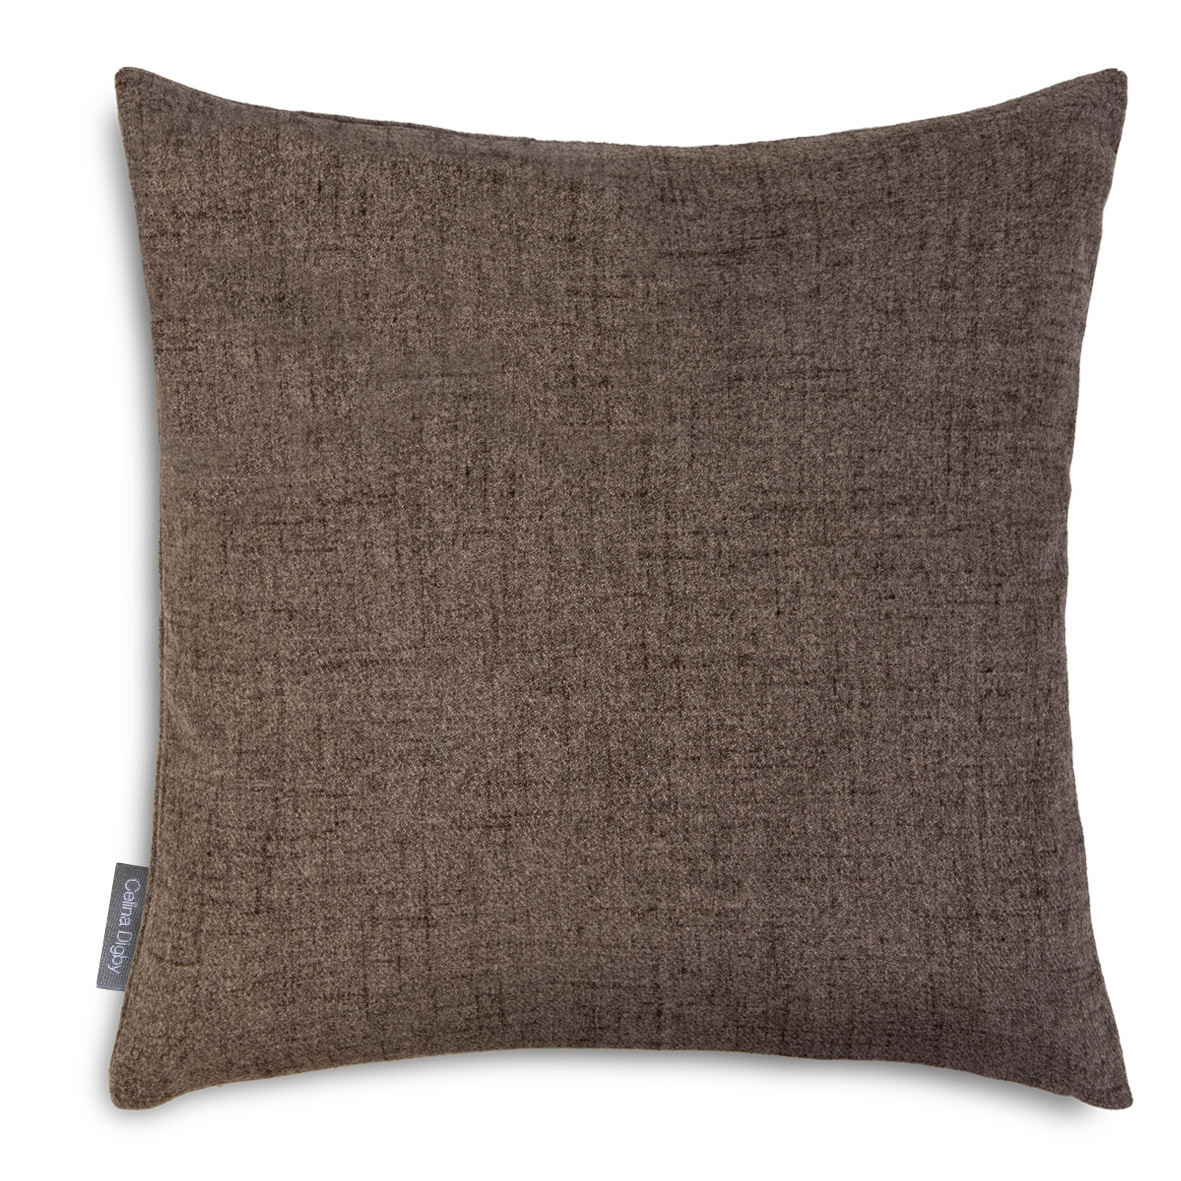 Celina Digby Luxury Wool Effect Cushion – Antique Brown (Available in 2 Sizes) Extra Large (55x55cm) Feather Filling